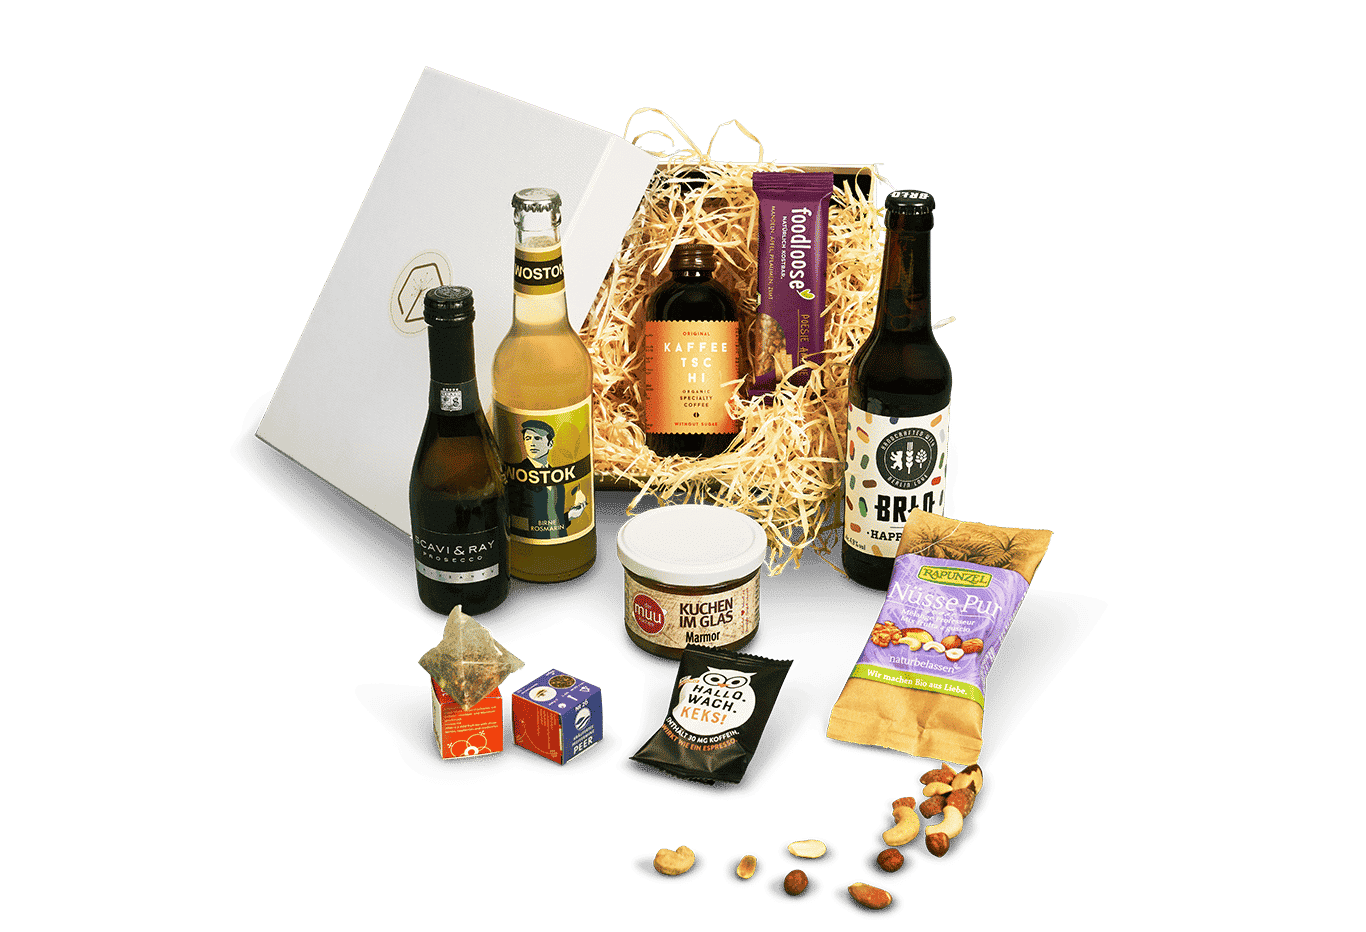 Our Last Minute Box includes an invigorating cold brew coffee, a delicious Happy Pils, sparkling prosecco, exciting pear and rosemary lemonade, a delicious marble cake, crunchy natural nuts, a healthy Poesie Amelie bar, an activating Hallo.Wach.Keks! and no less than 2 aromatic teas.